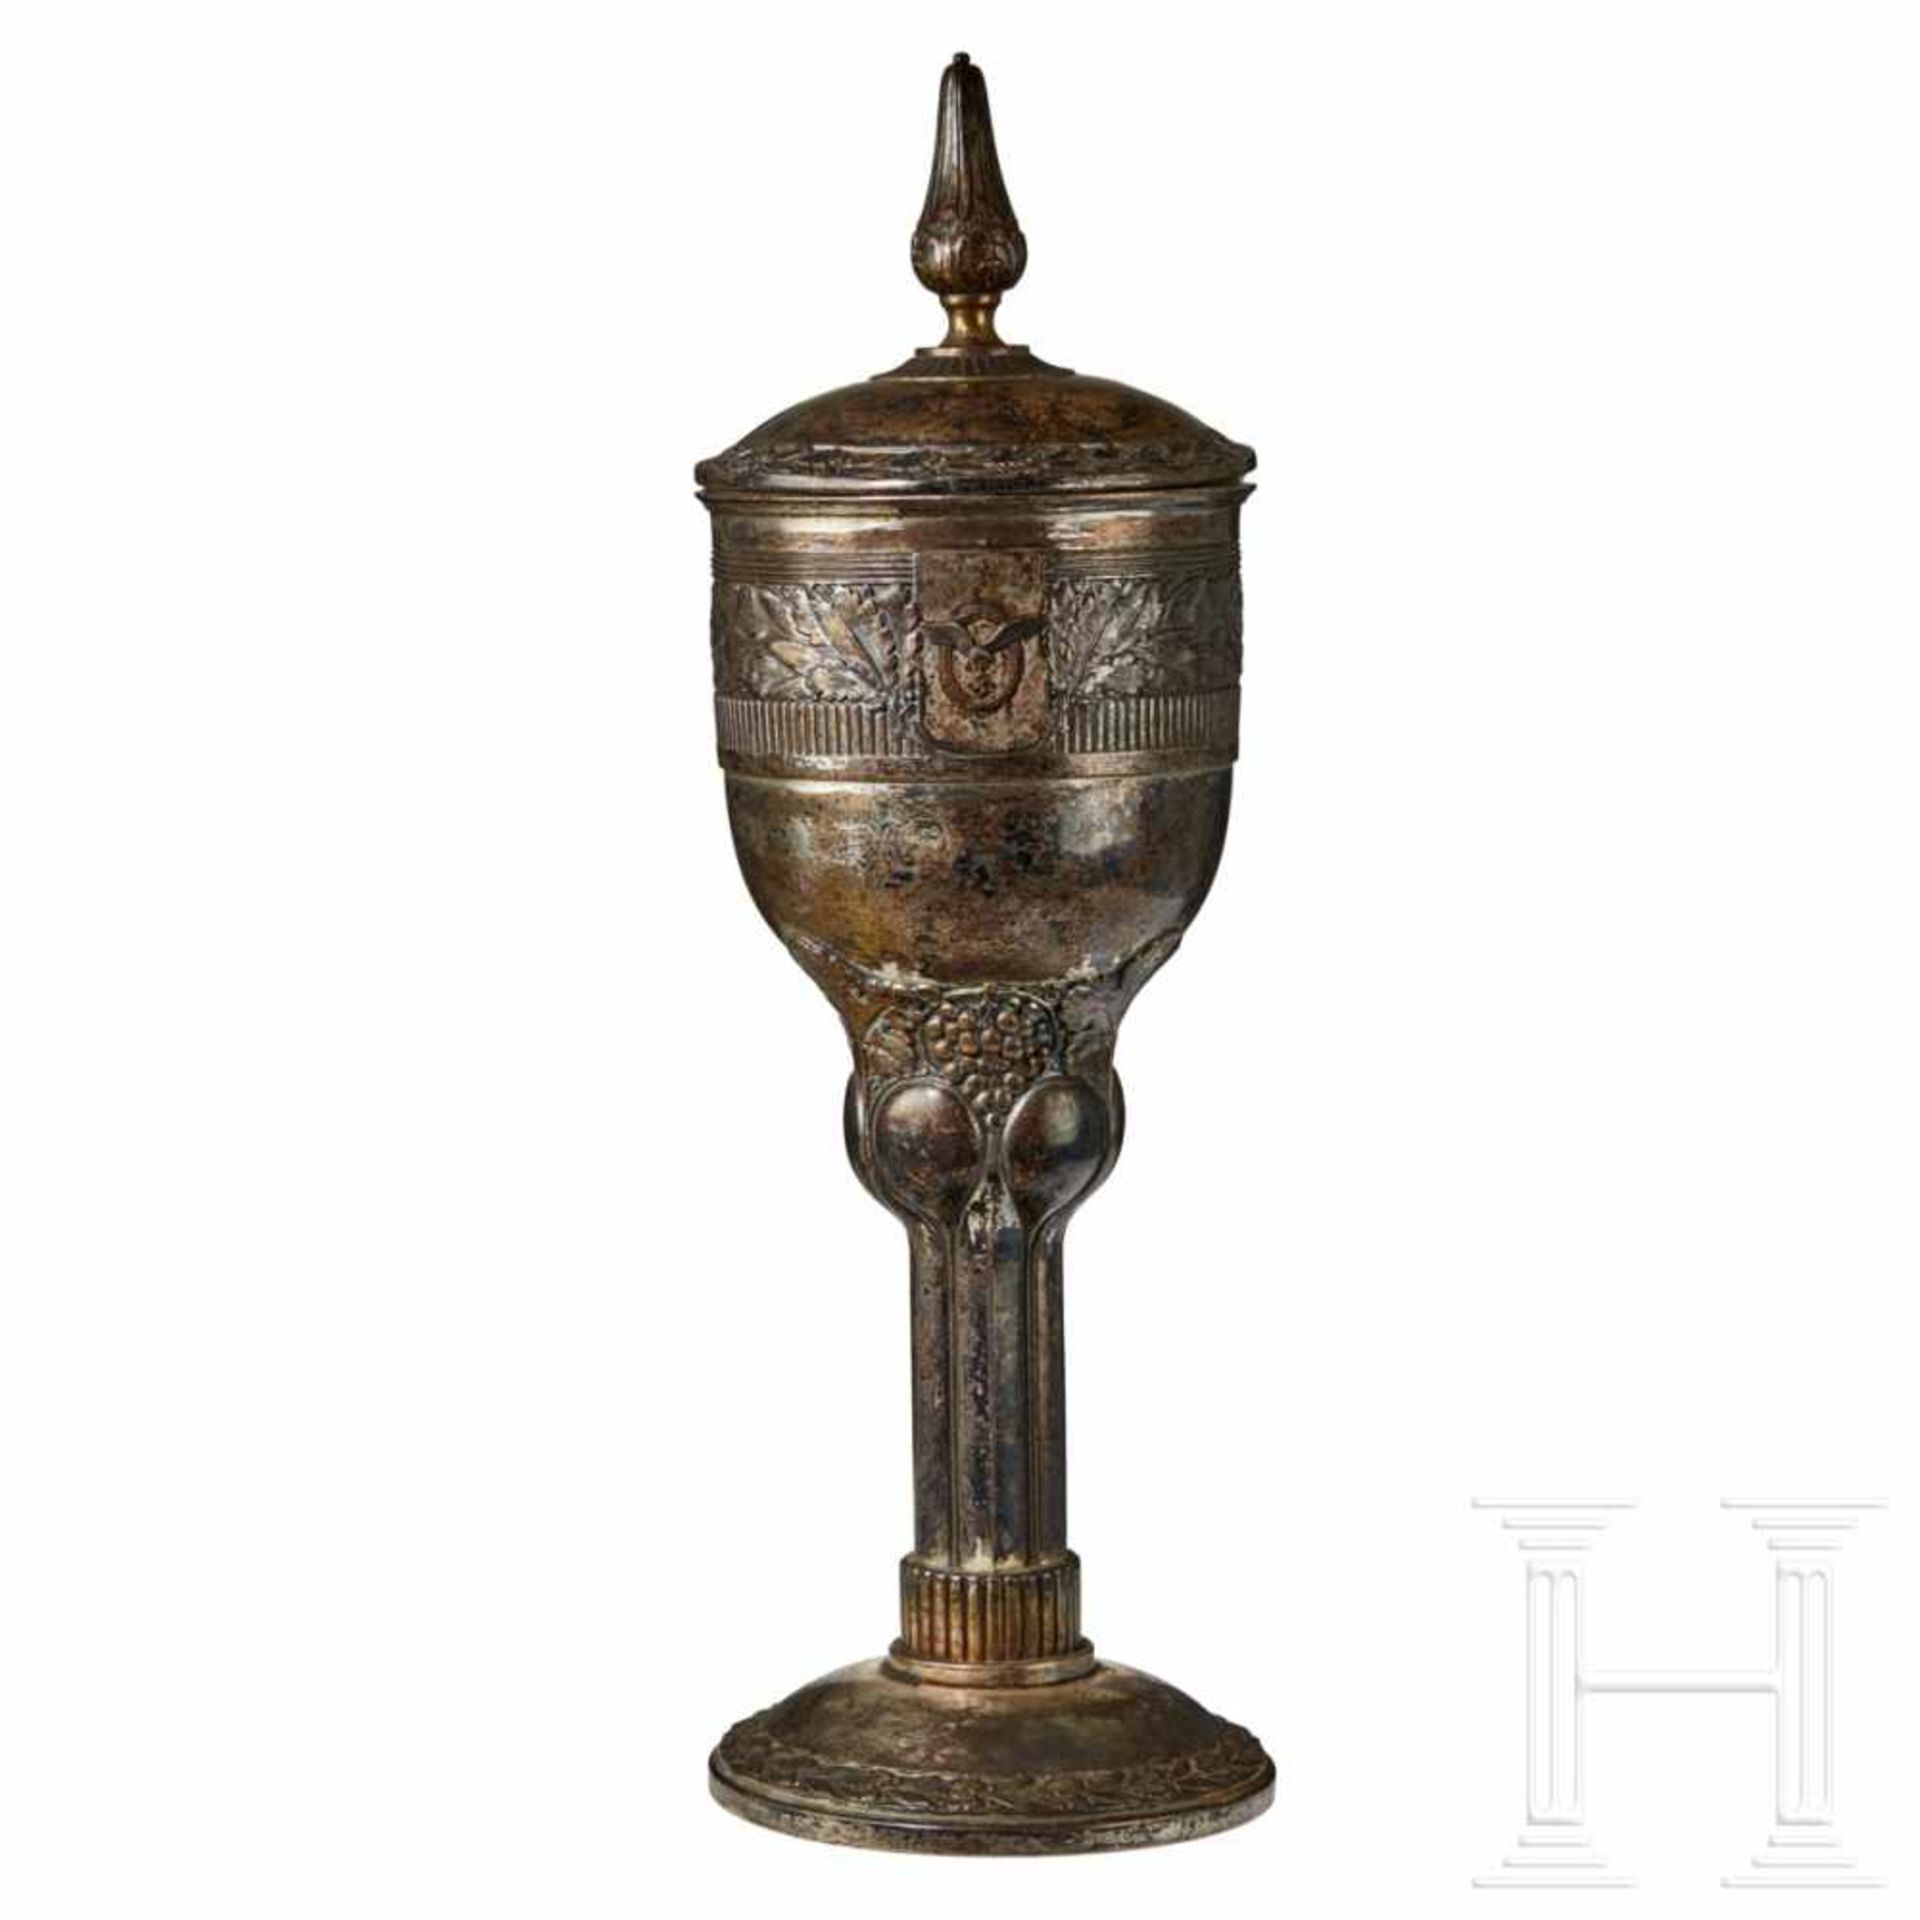 A decorative Flyer’s GobletLarge, silver plated goblet with detachable lid, decorative motif of